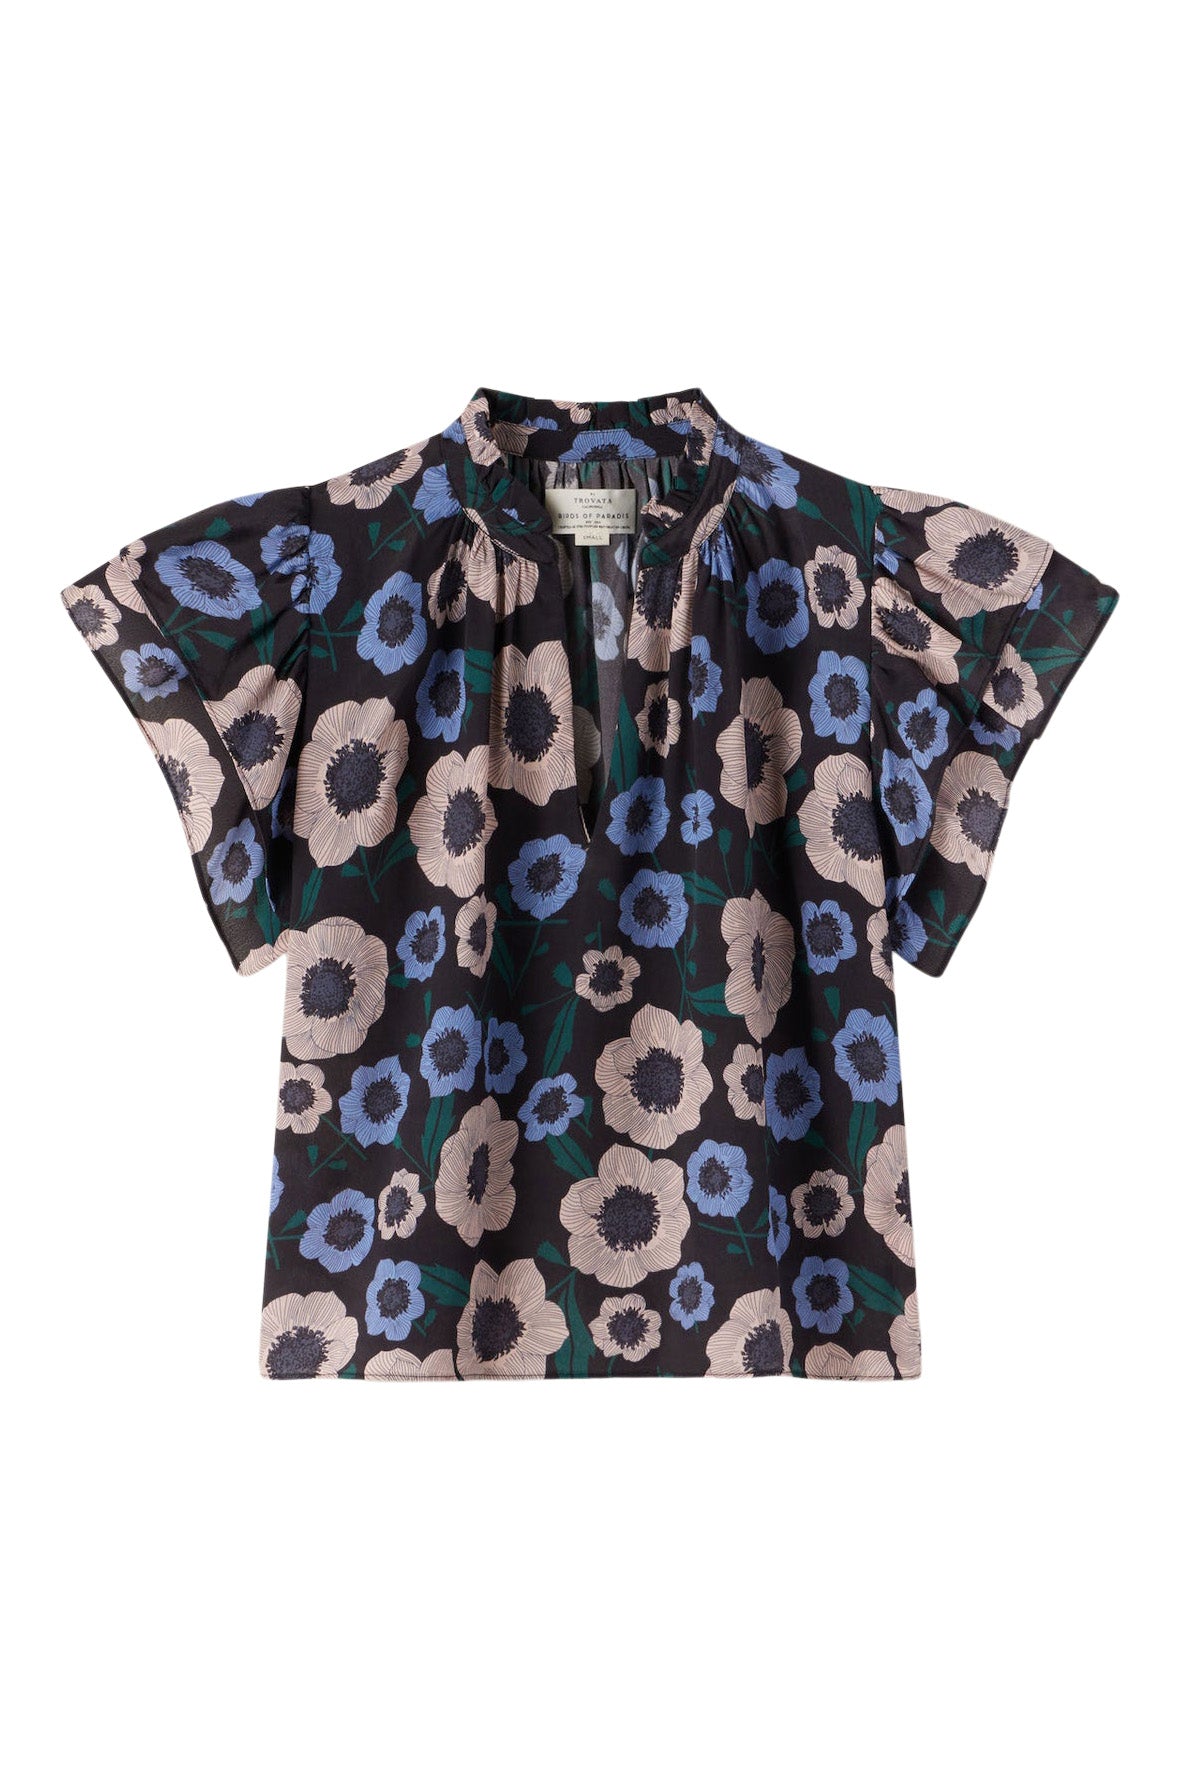 Trovata Brids of Paradise Clover Blouse in Navy Poppies